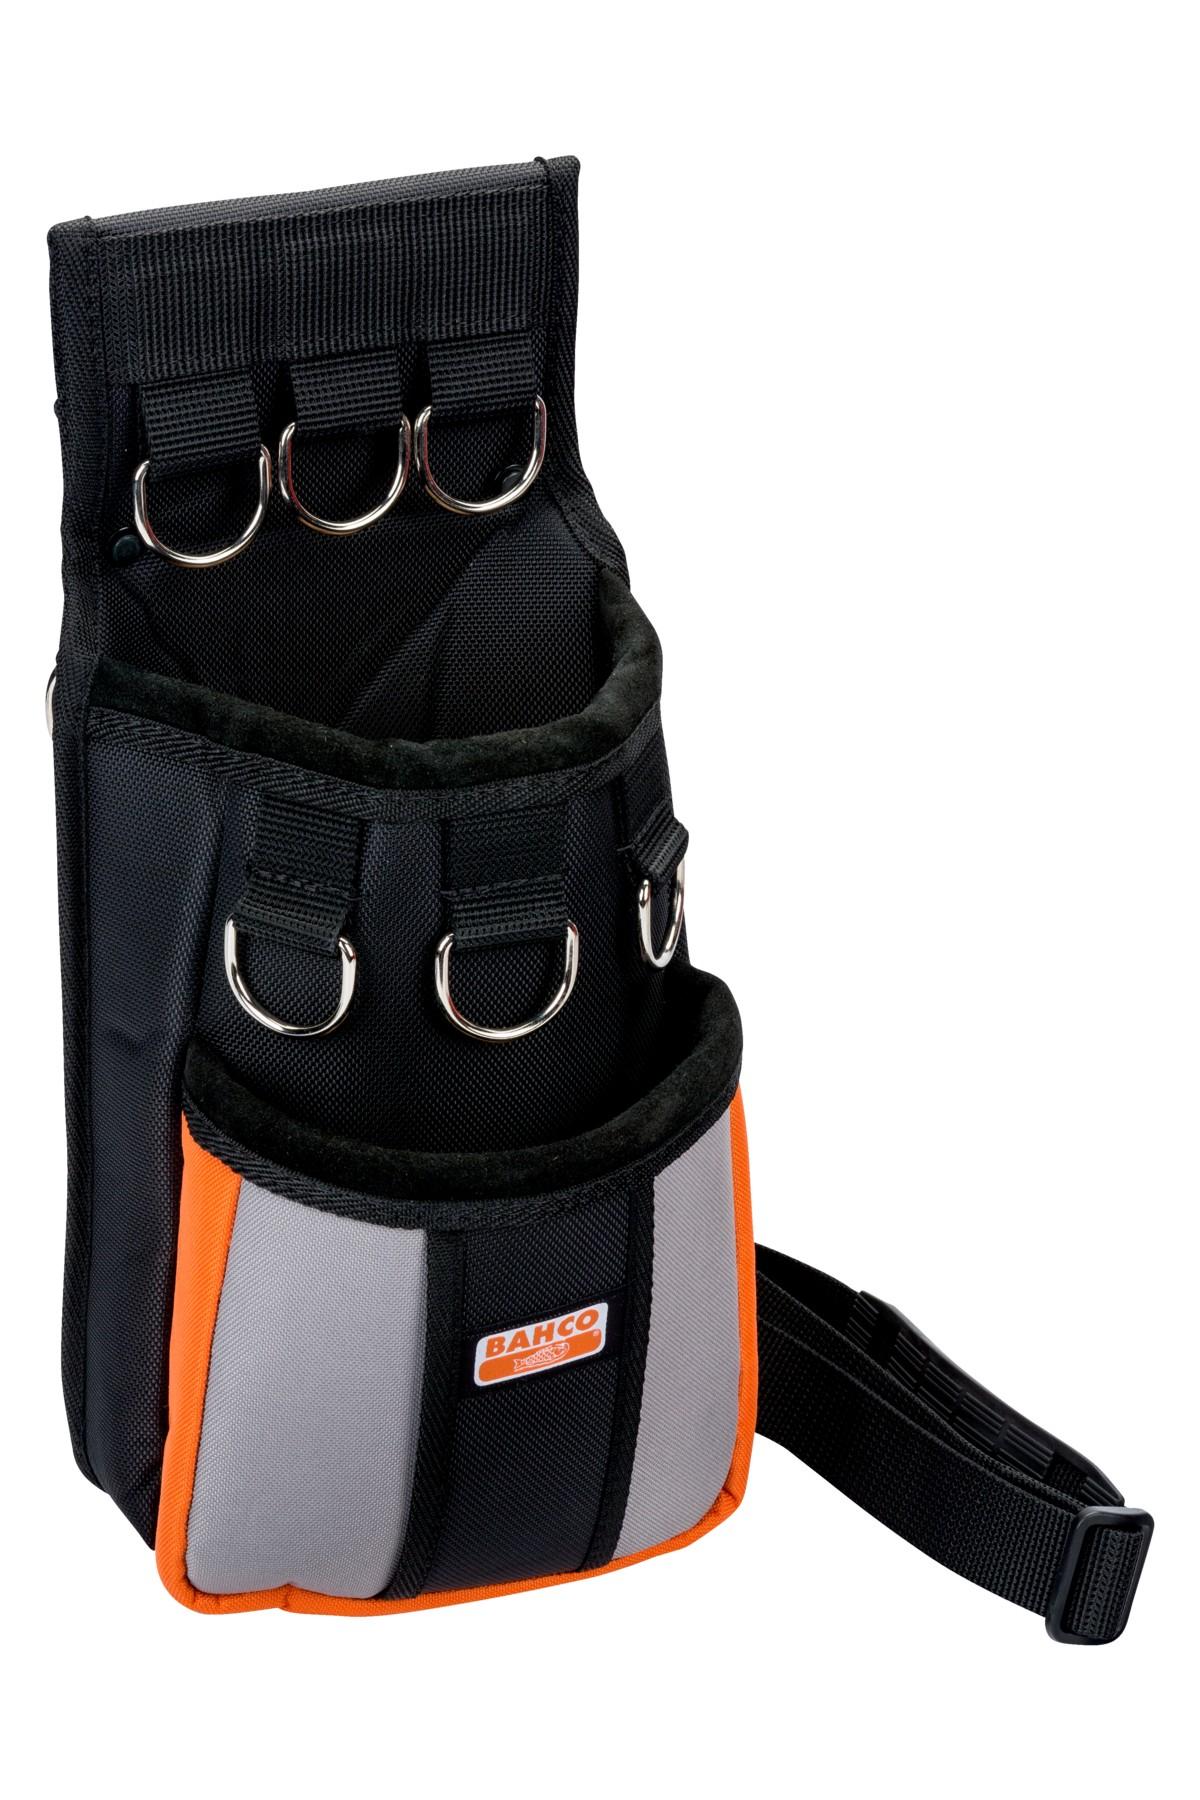 Pockets with 2 large compartments and 6 safety eyes for attaching a safety line